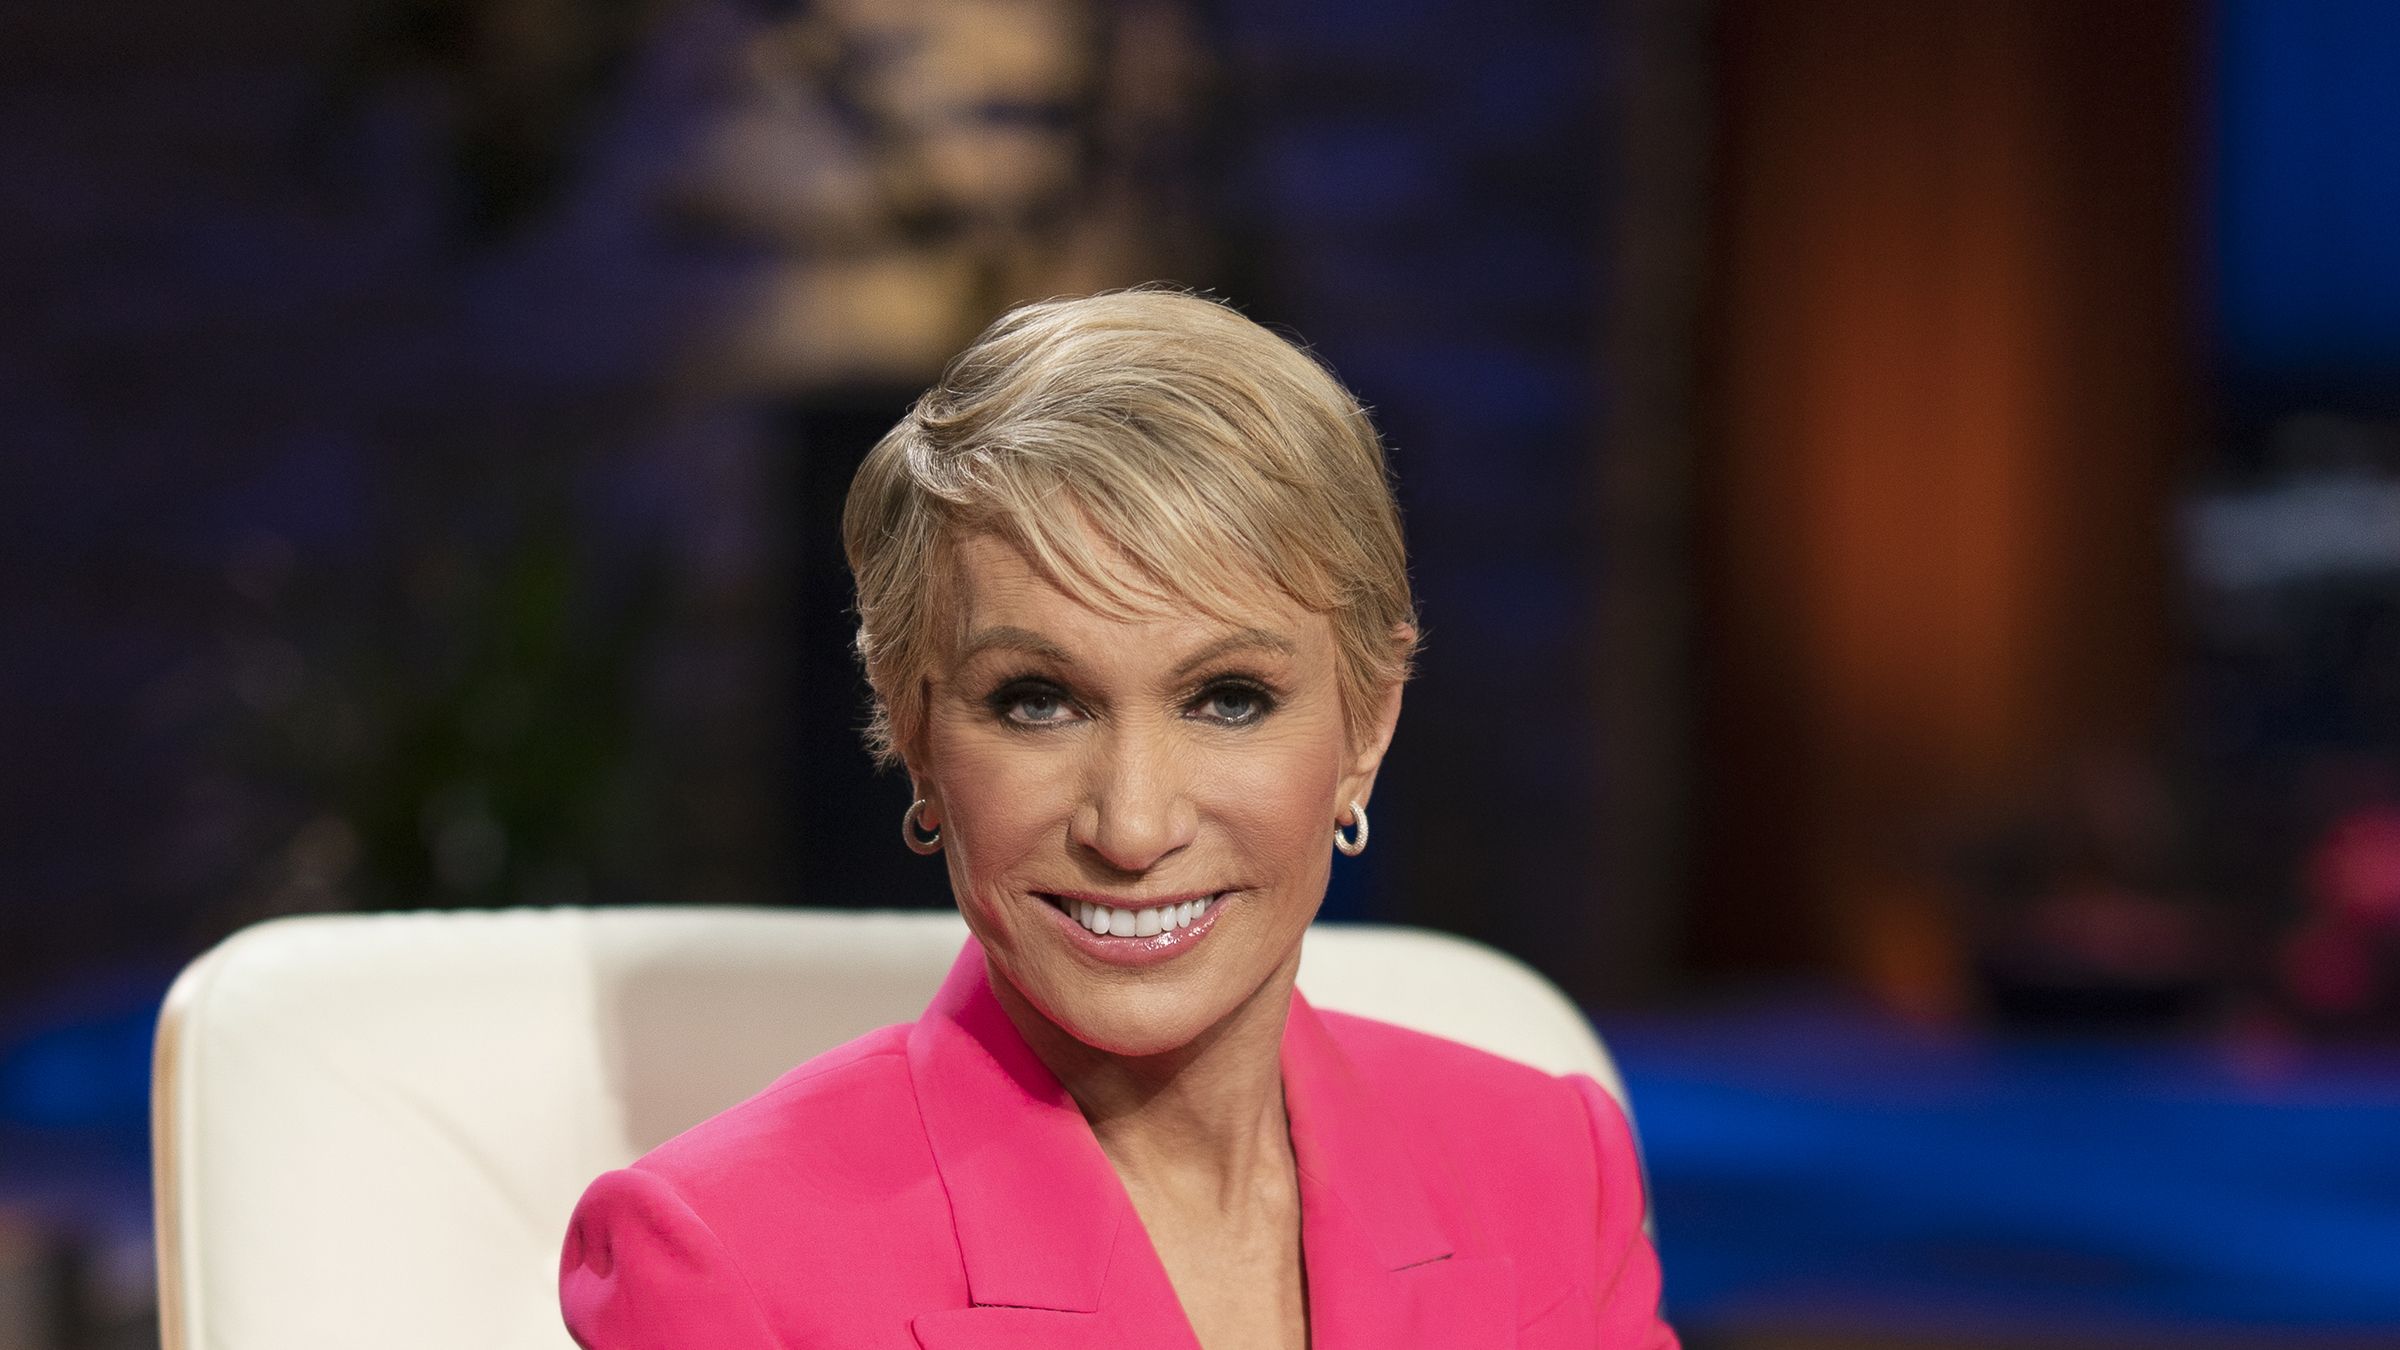 Barbara Corcoran's Massive Net Worth Is Reflected in Her Homes